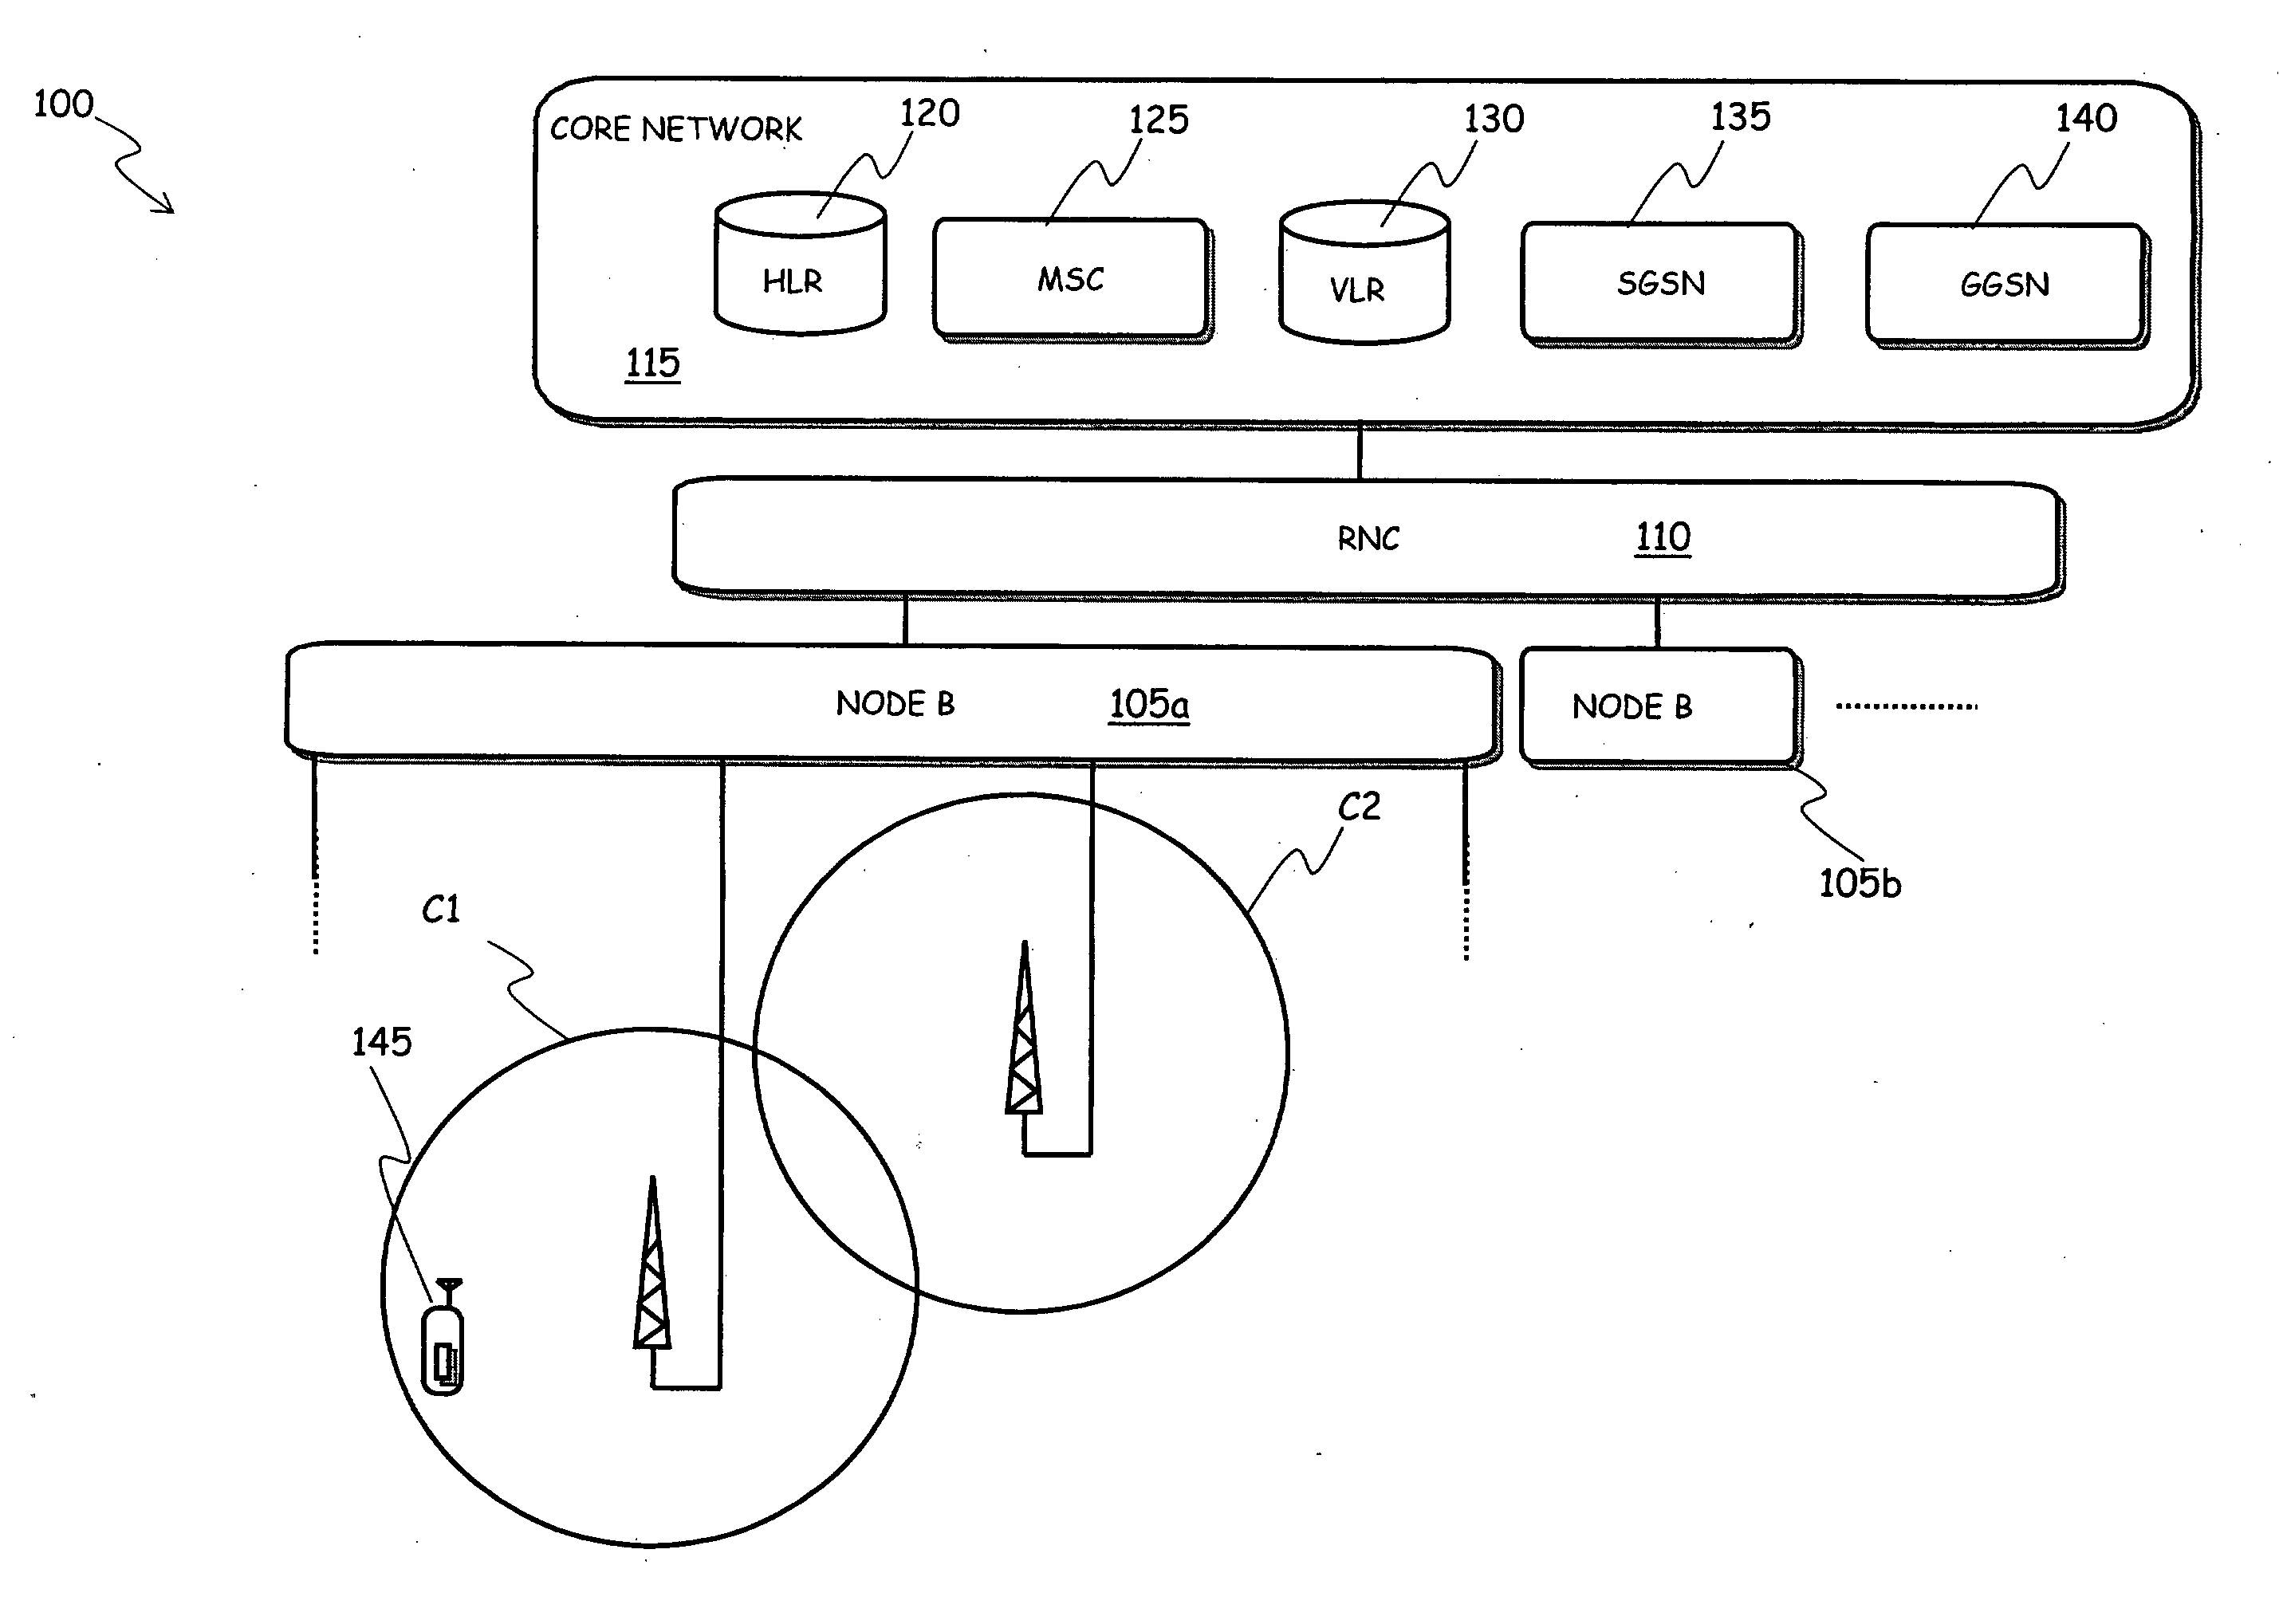 Method for Exploiting Signalling Messages in a Wireless Communication Network